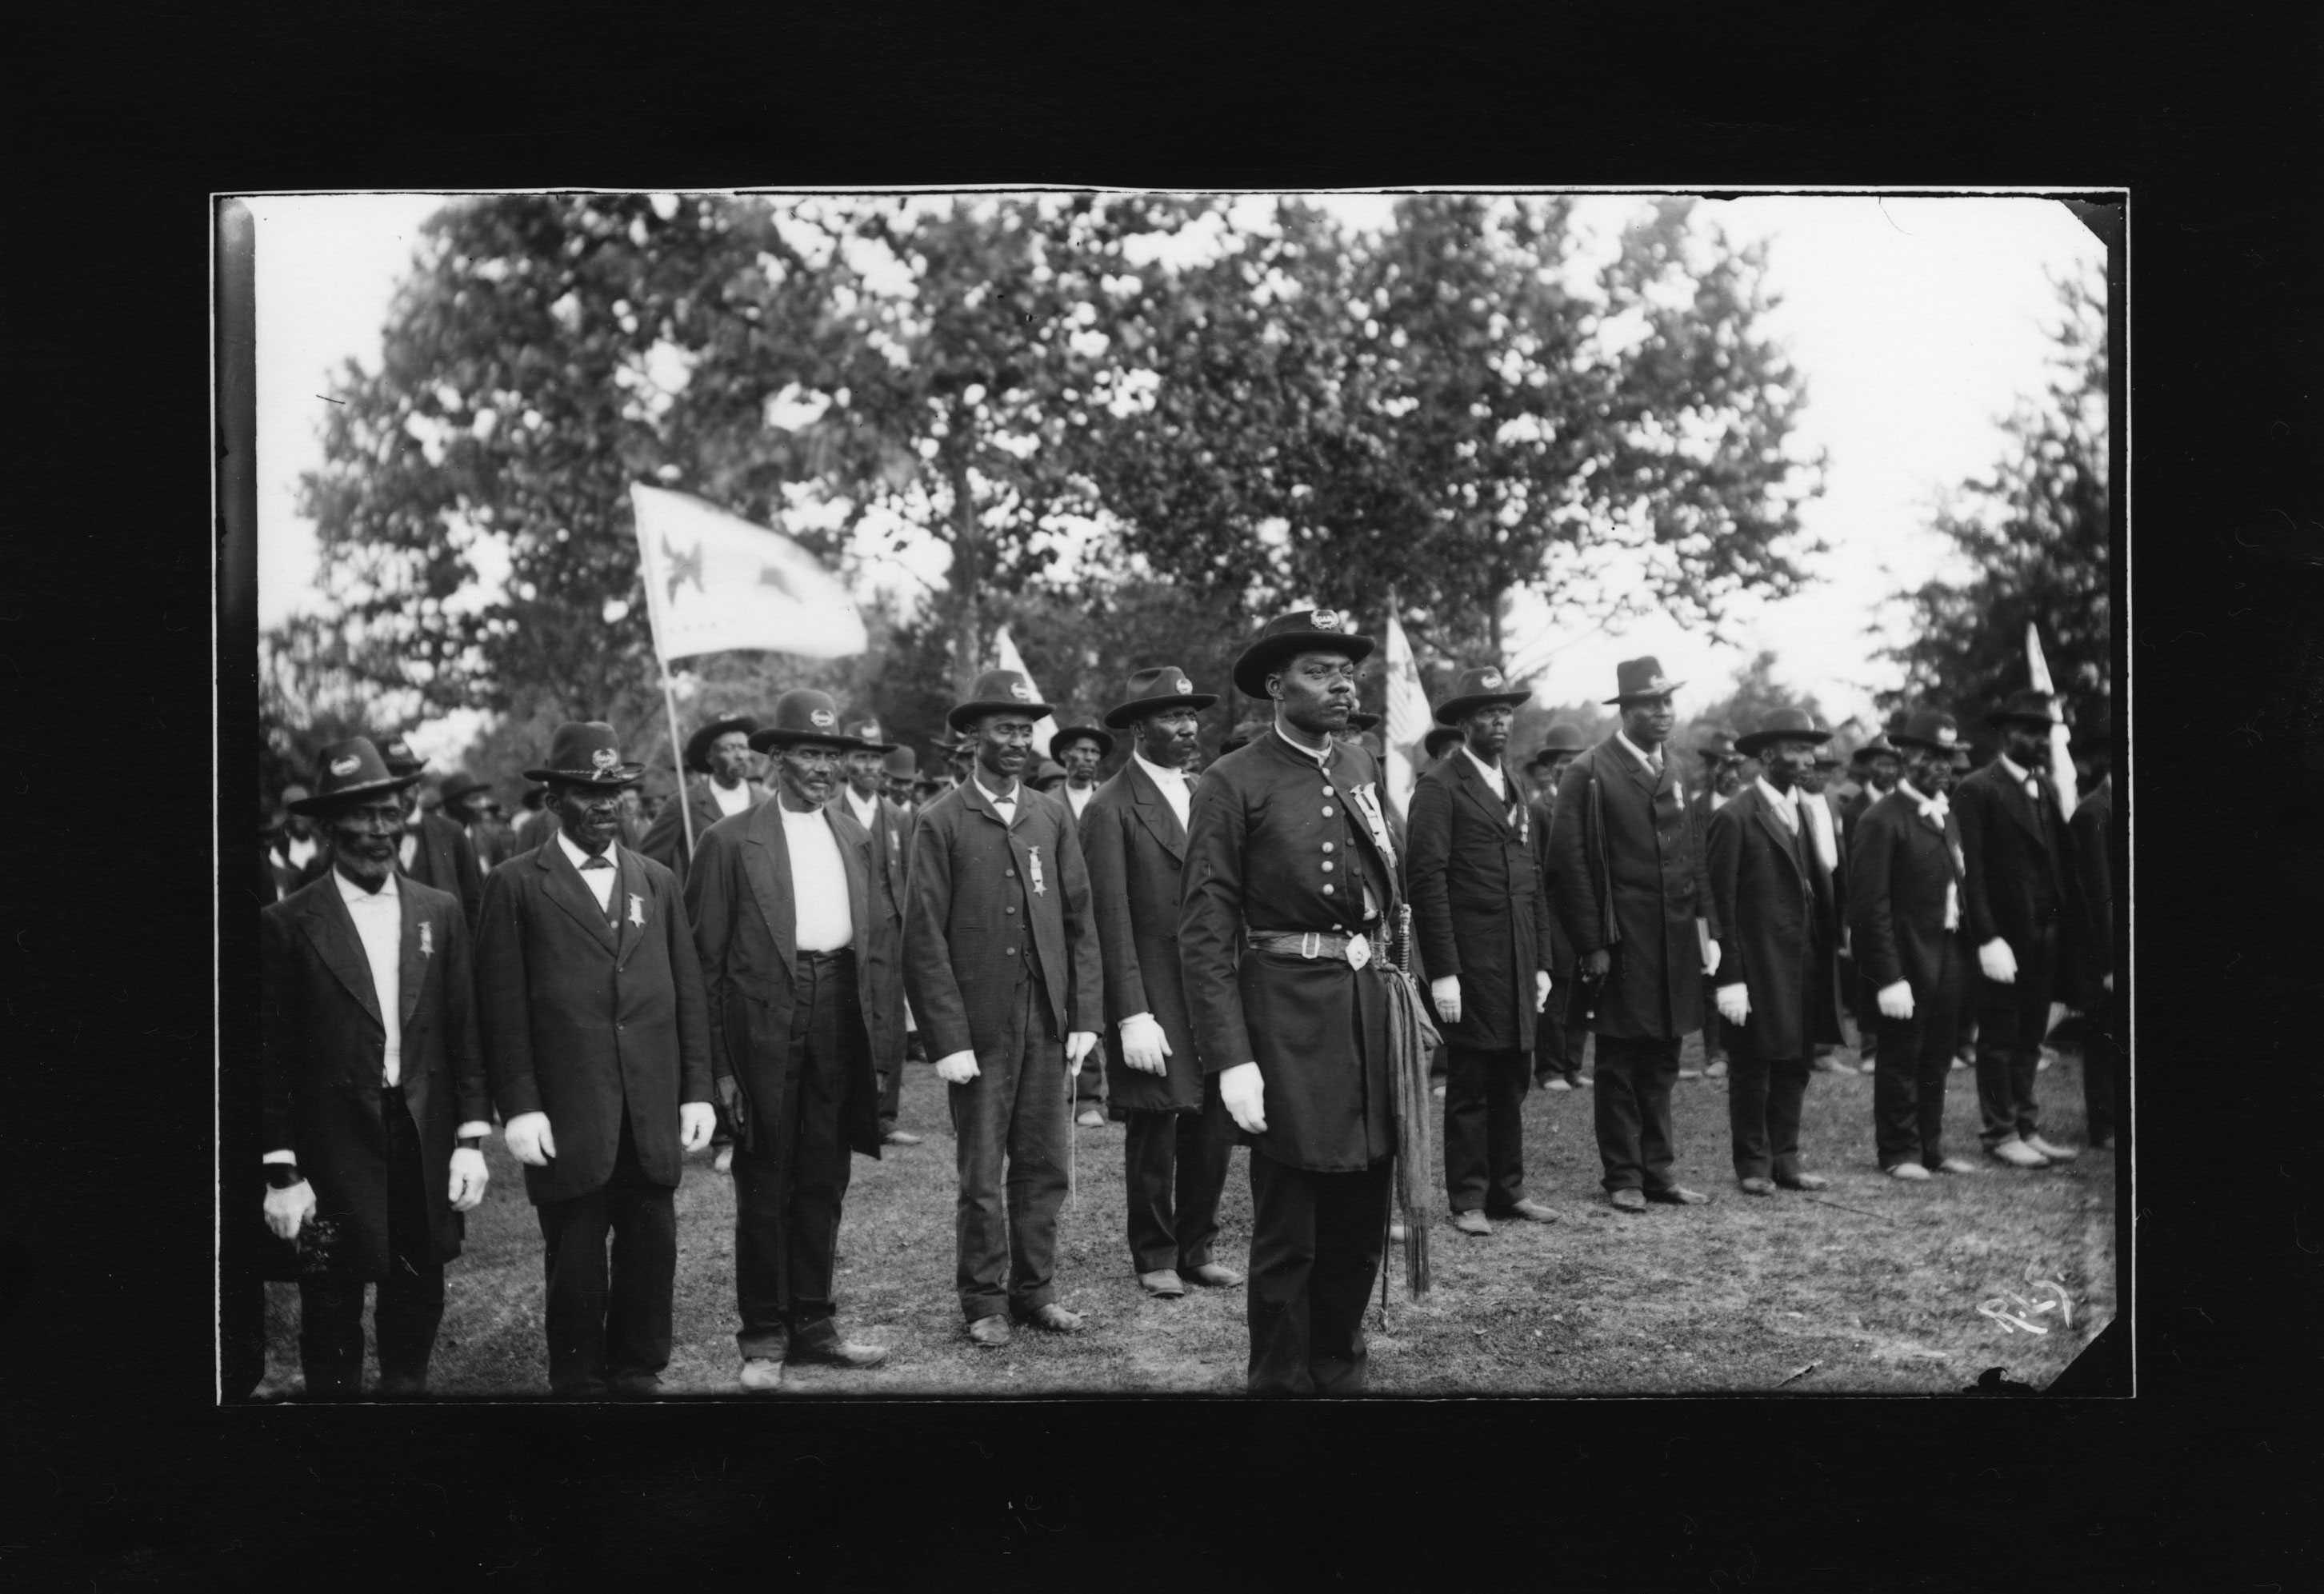 A black and white photo of 2 rows of African American soldiers lined up next to each other. Some hold guns and flags.